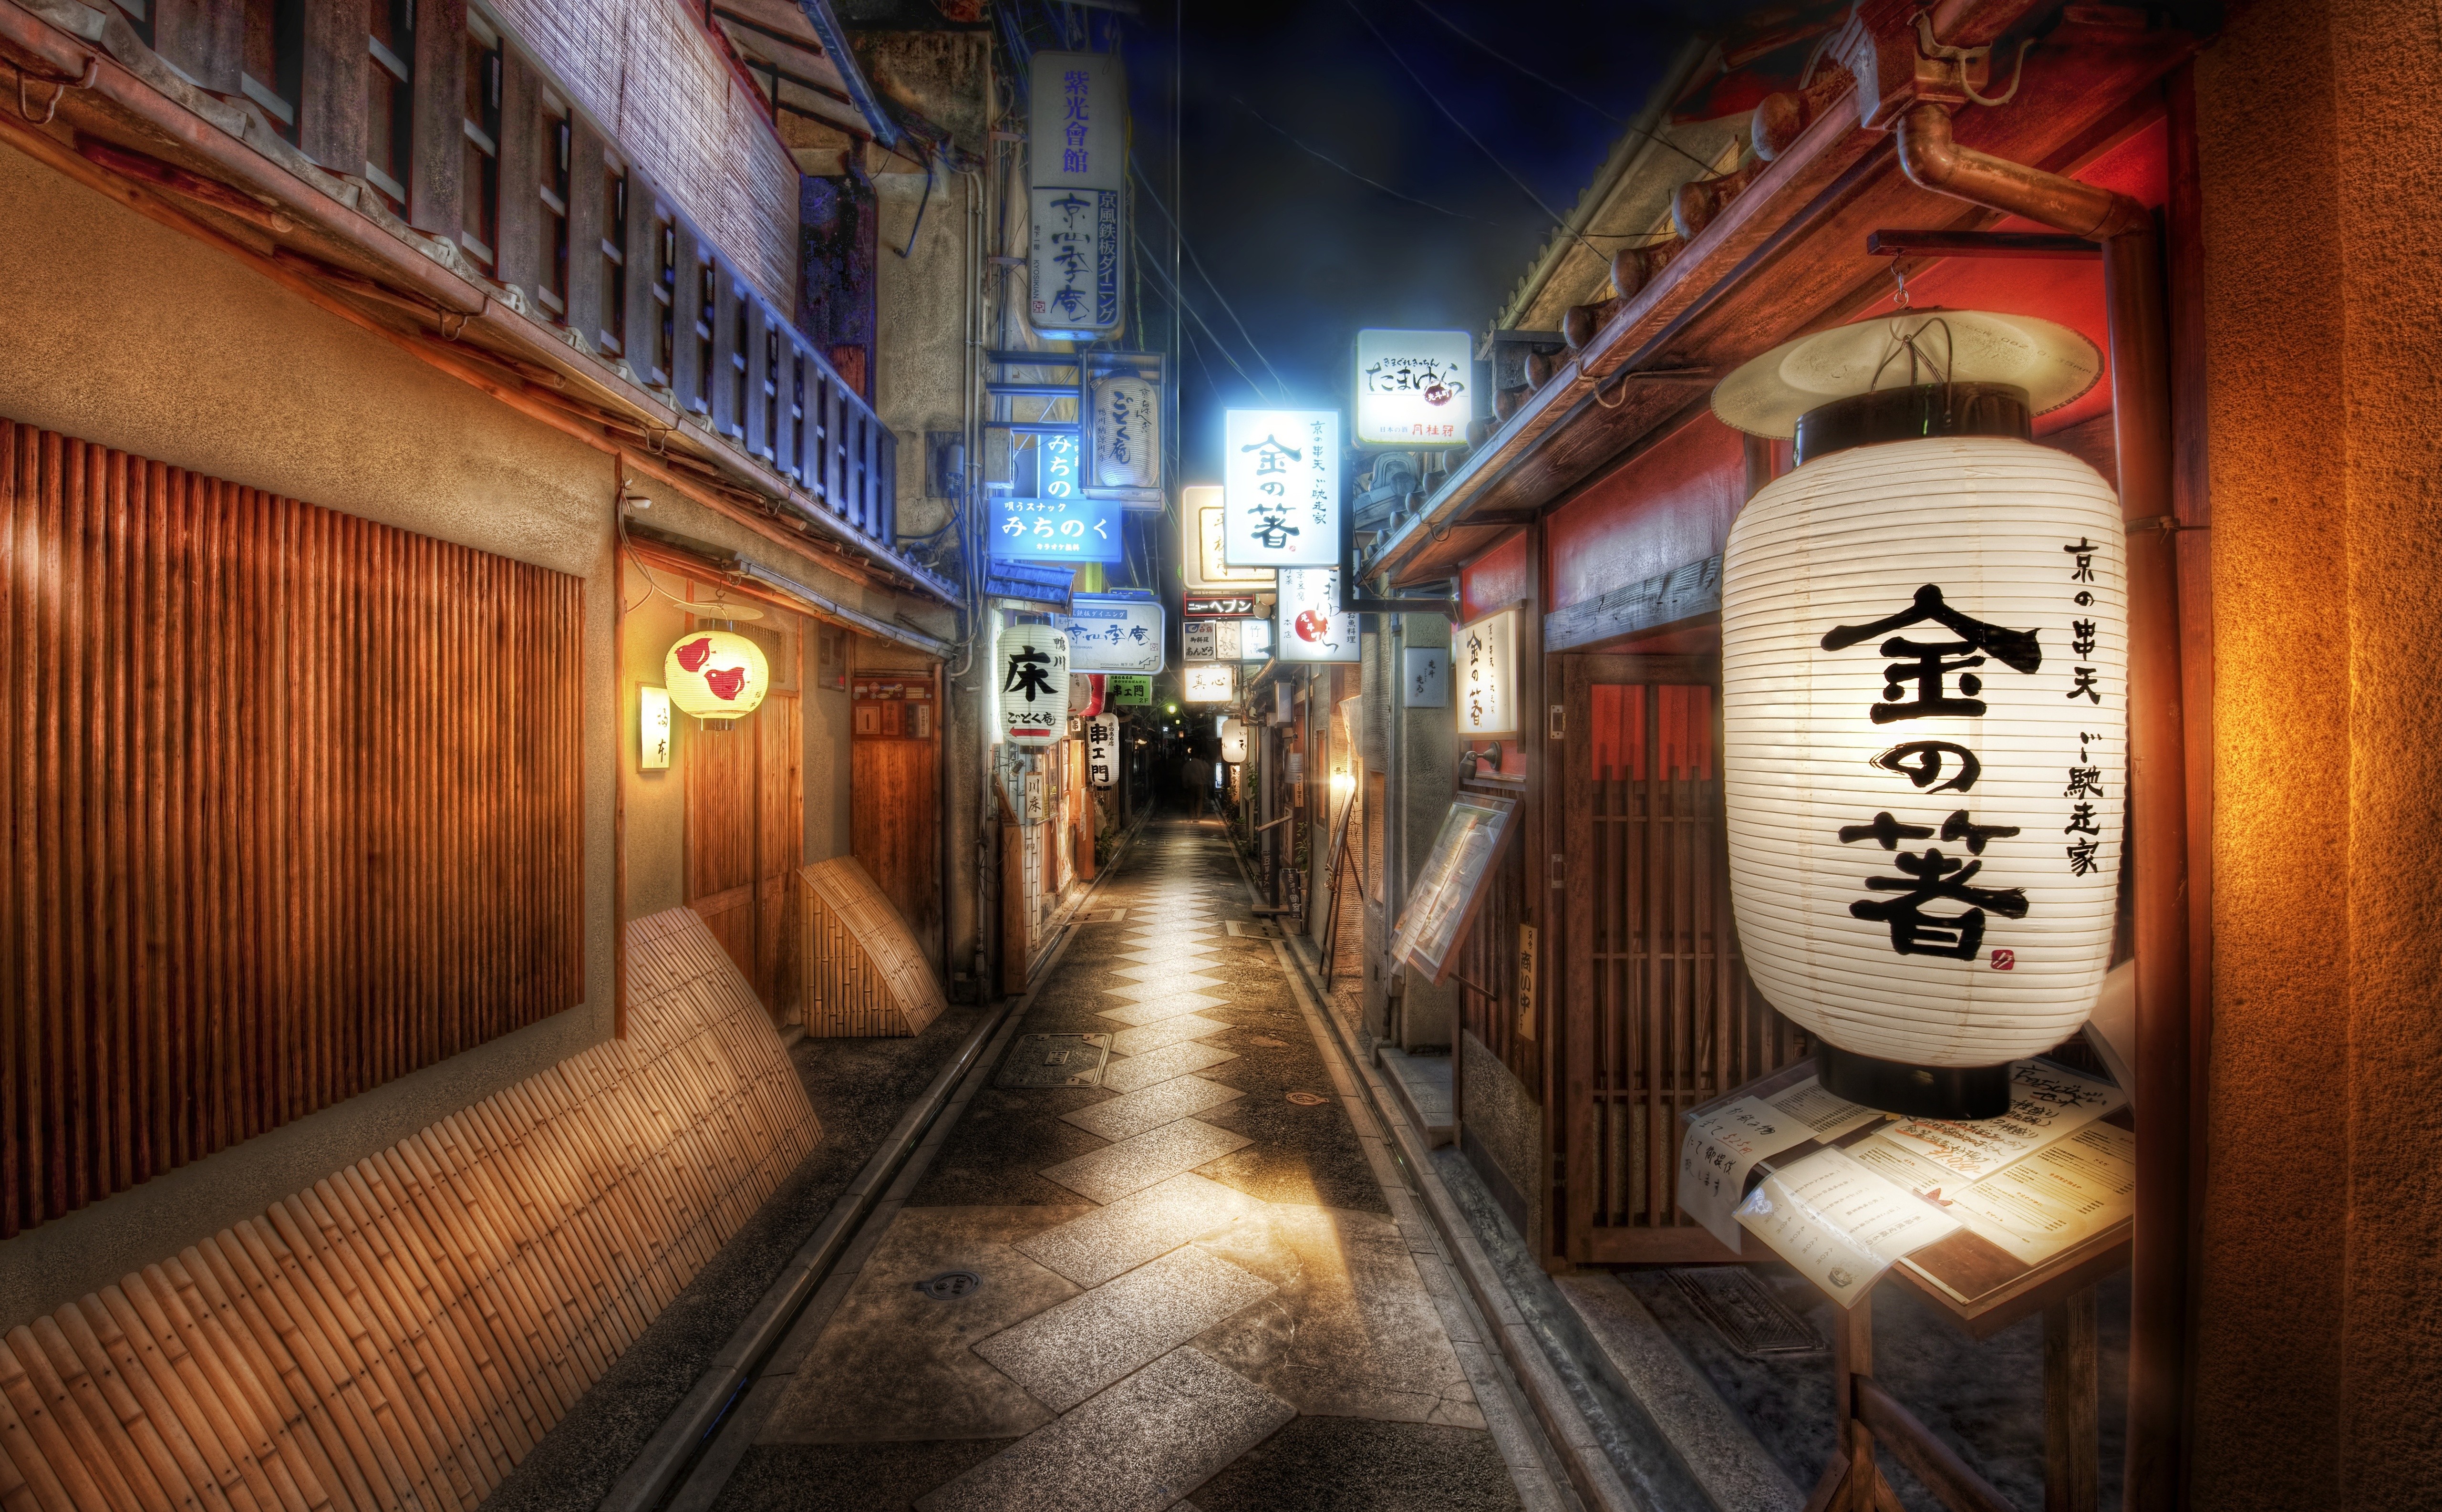 Japanese Cityscape Architecture Building Anime Hdr Night